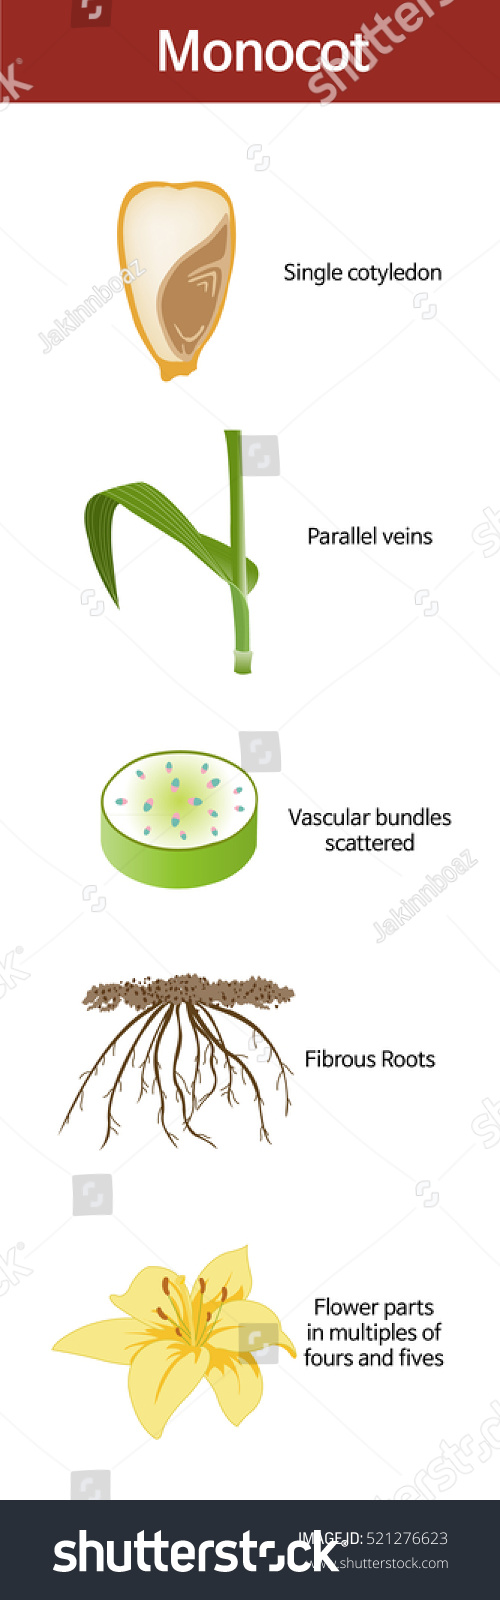 A picture summarizing the features of a monocot.